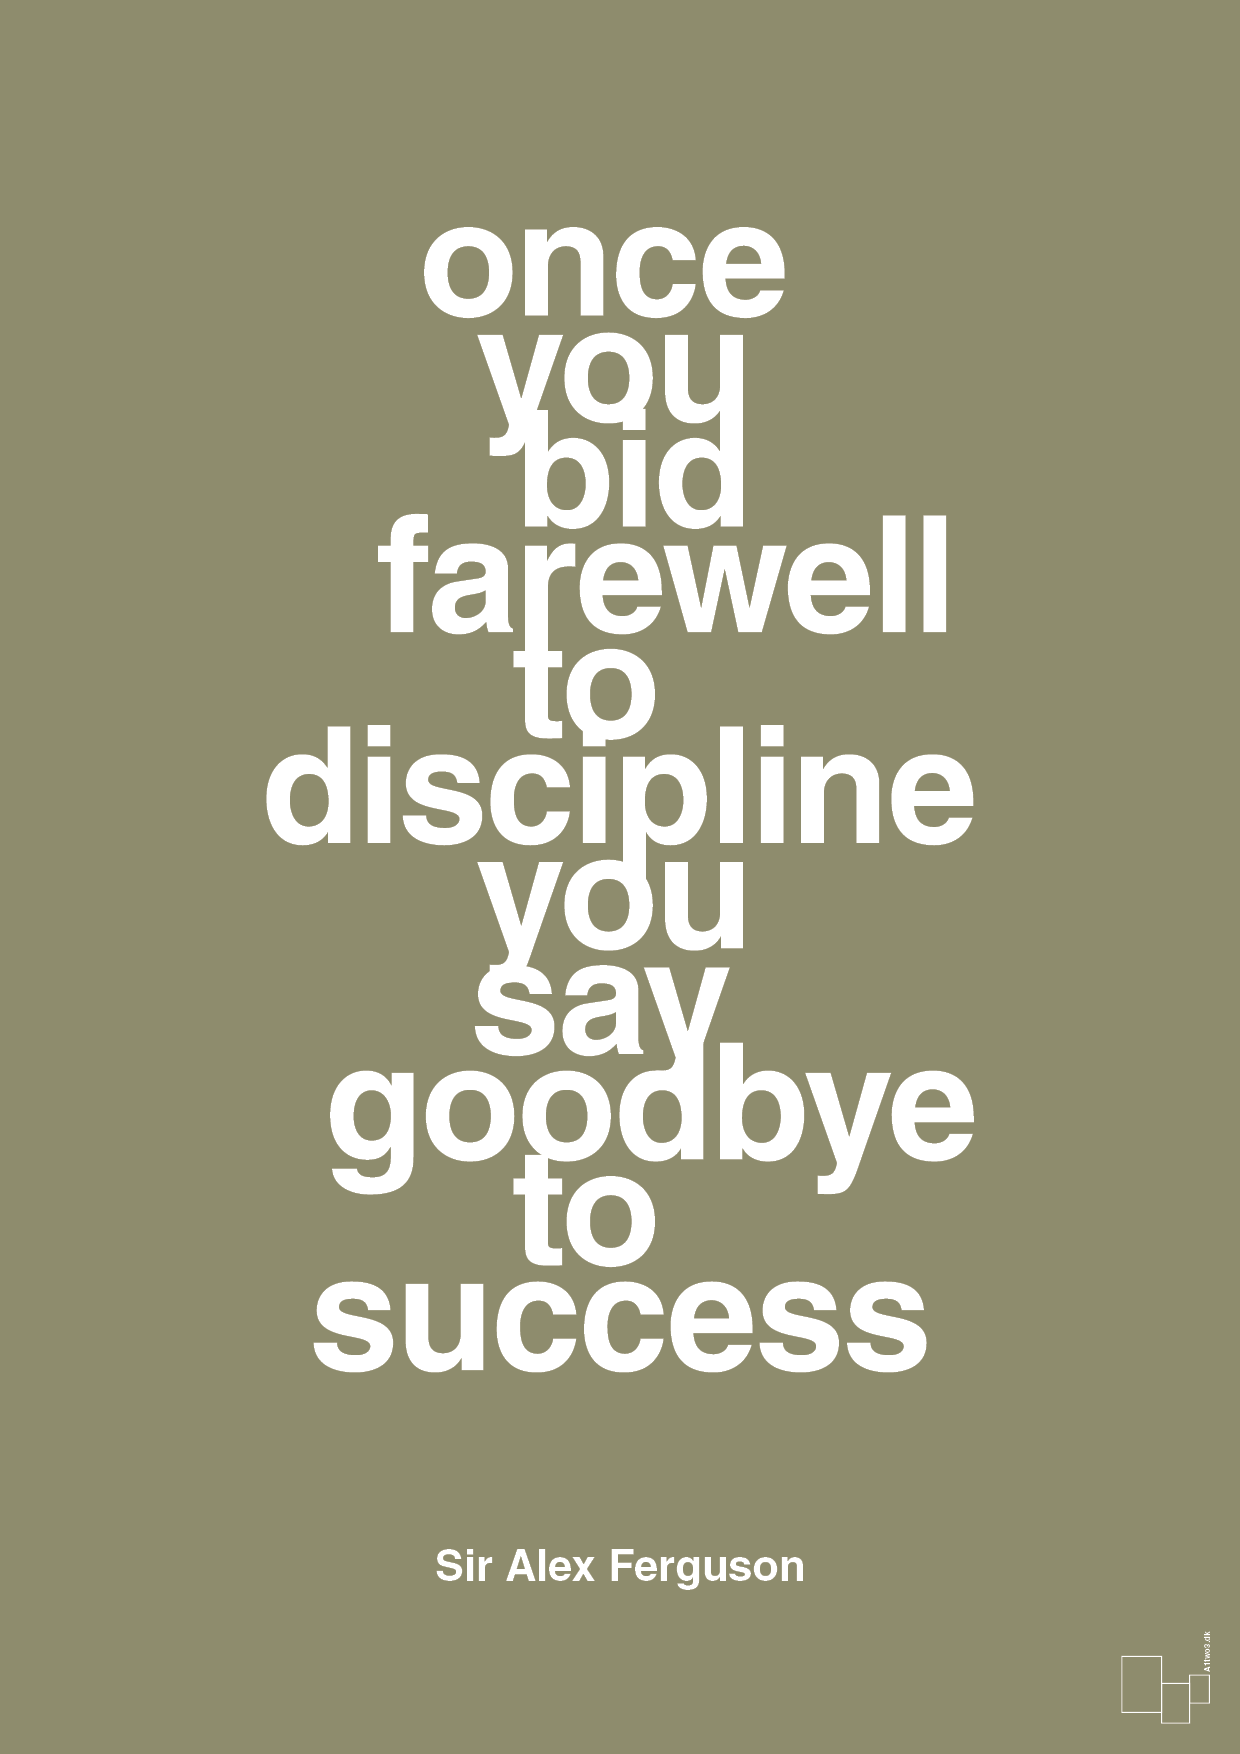 once you bid farewell to discipline you say goodbye to success - Plakat med Citater i Misty Forrest